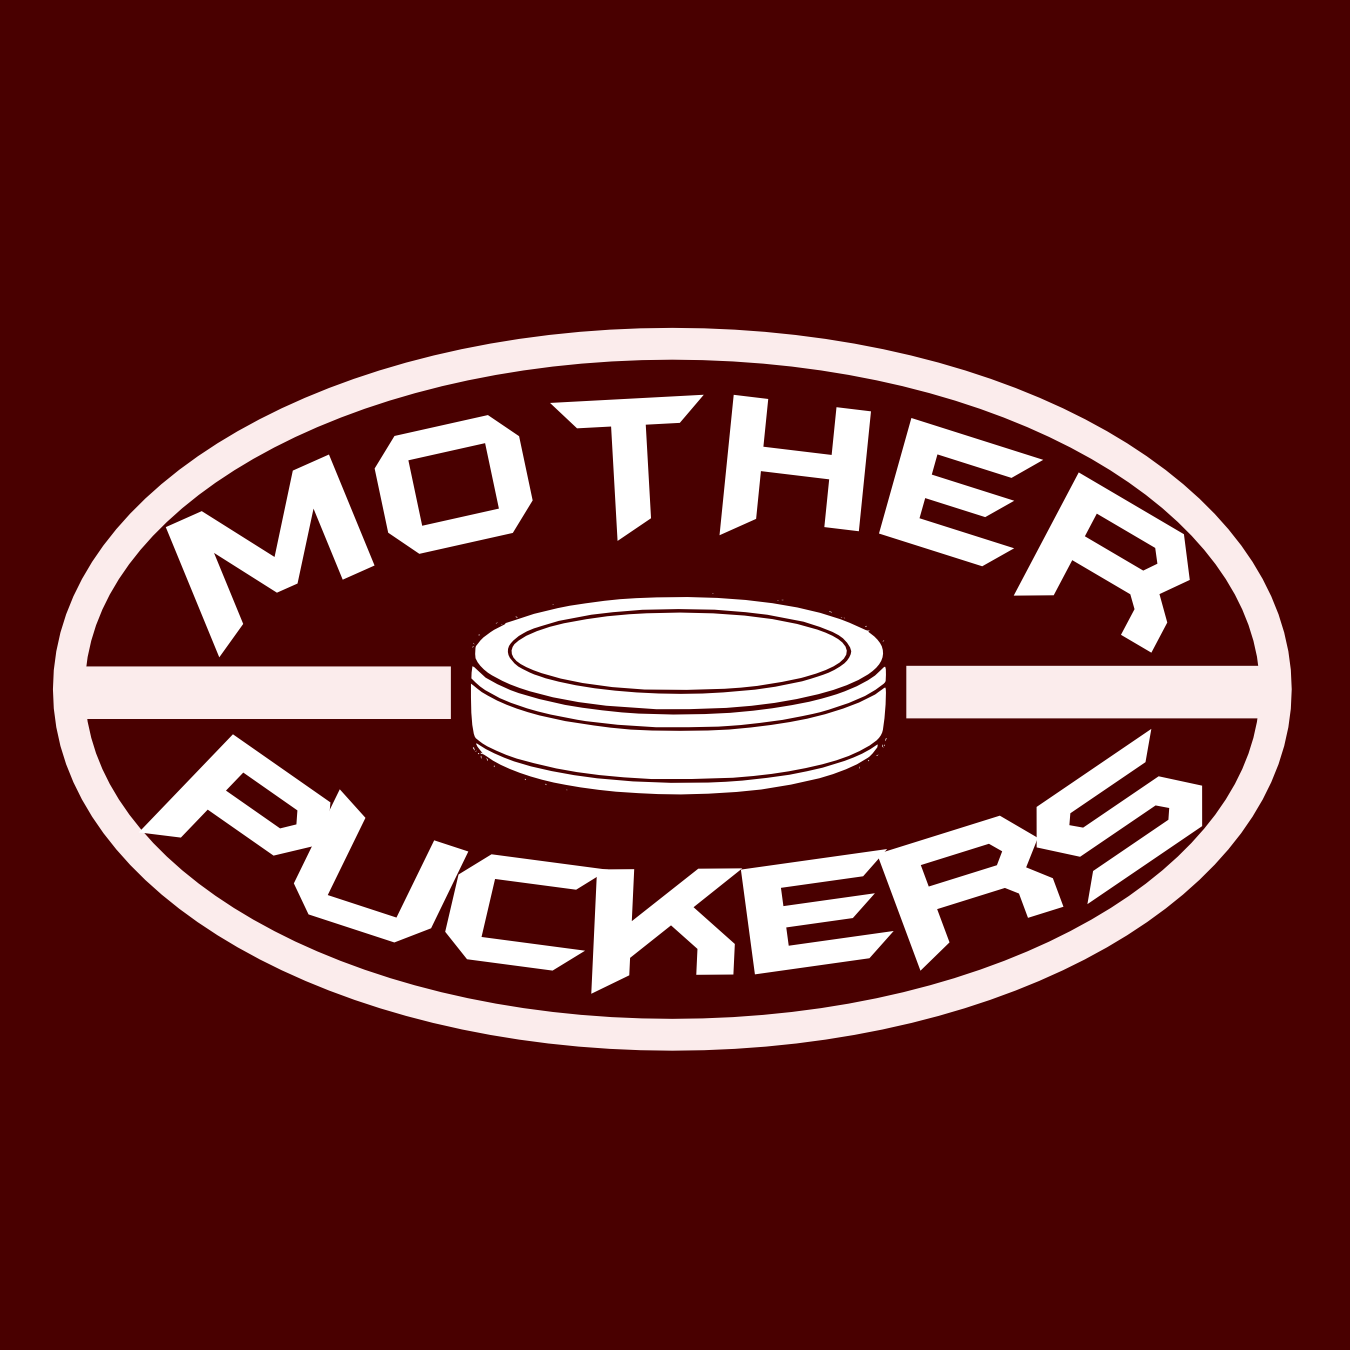 Official twitter account of TMP - The Mother Puckers Hockey. 4 Time Champs. http://t.co/b31s5SnjtL